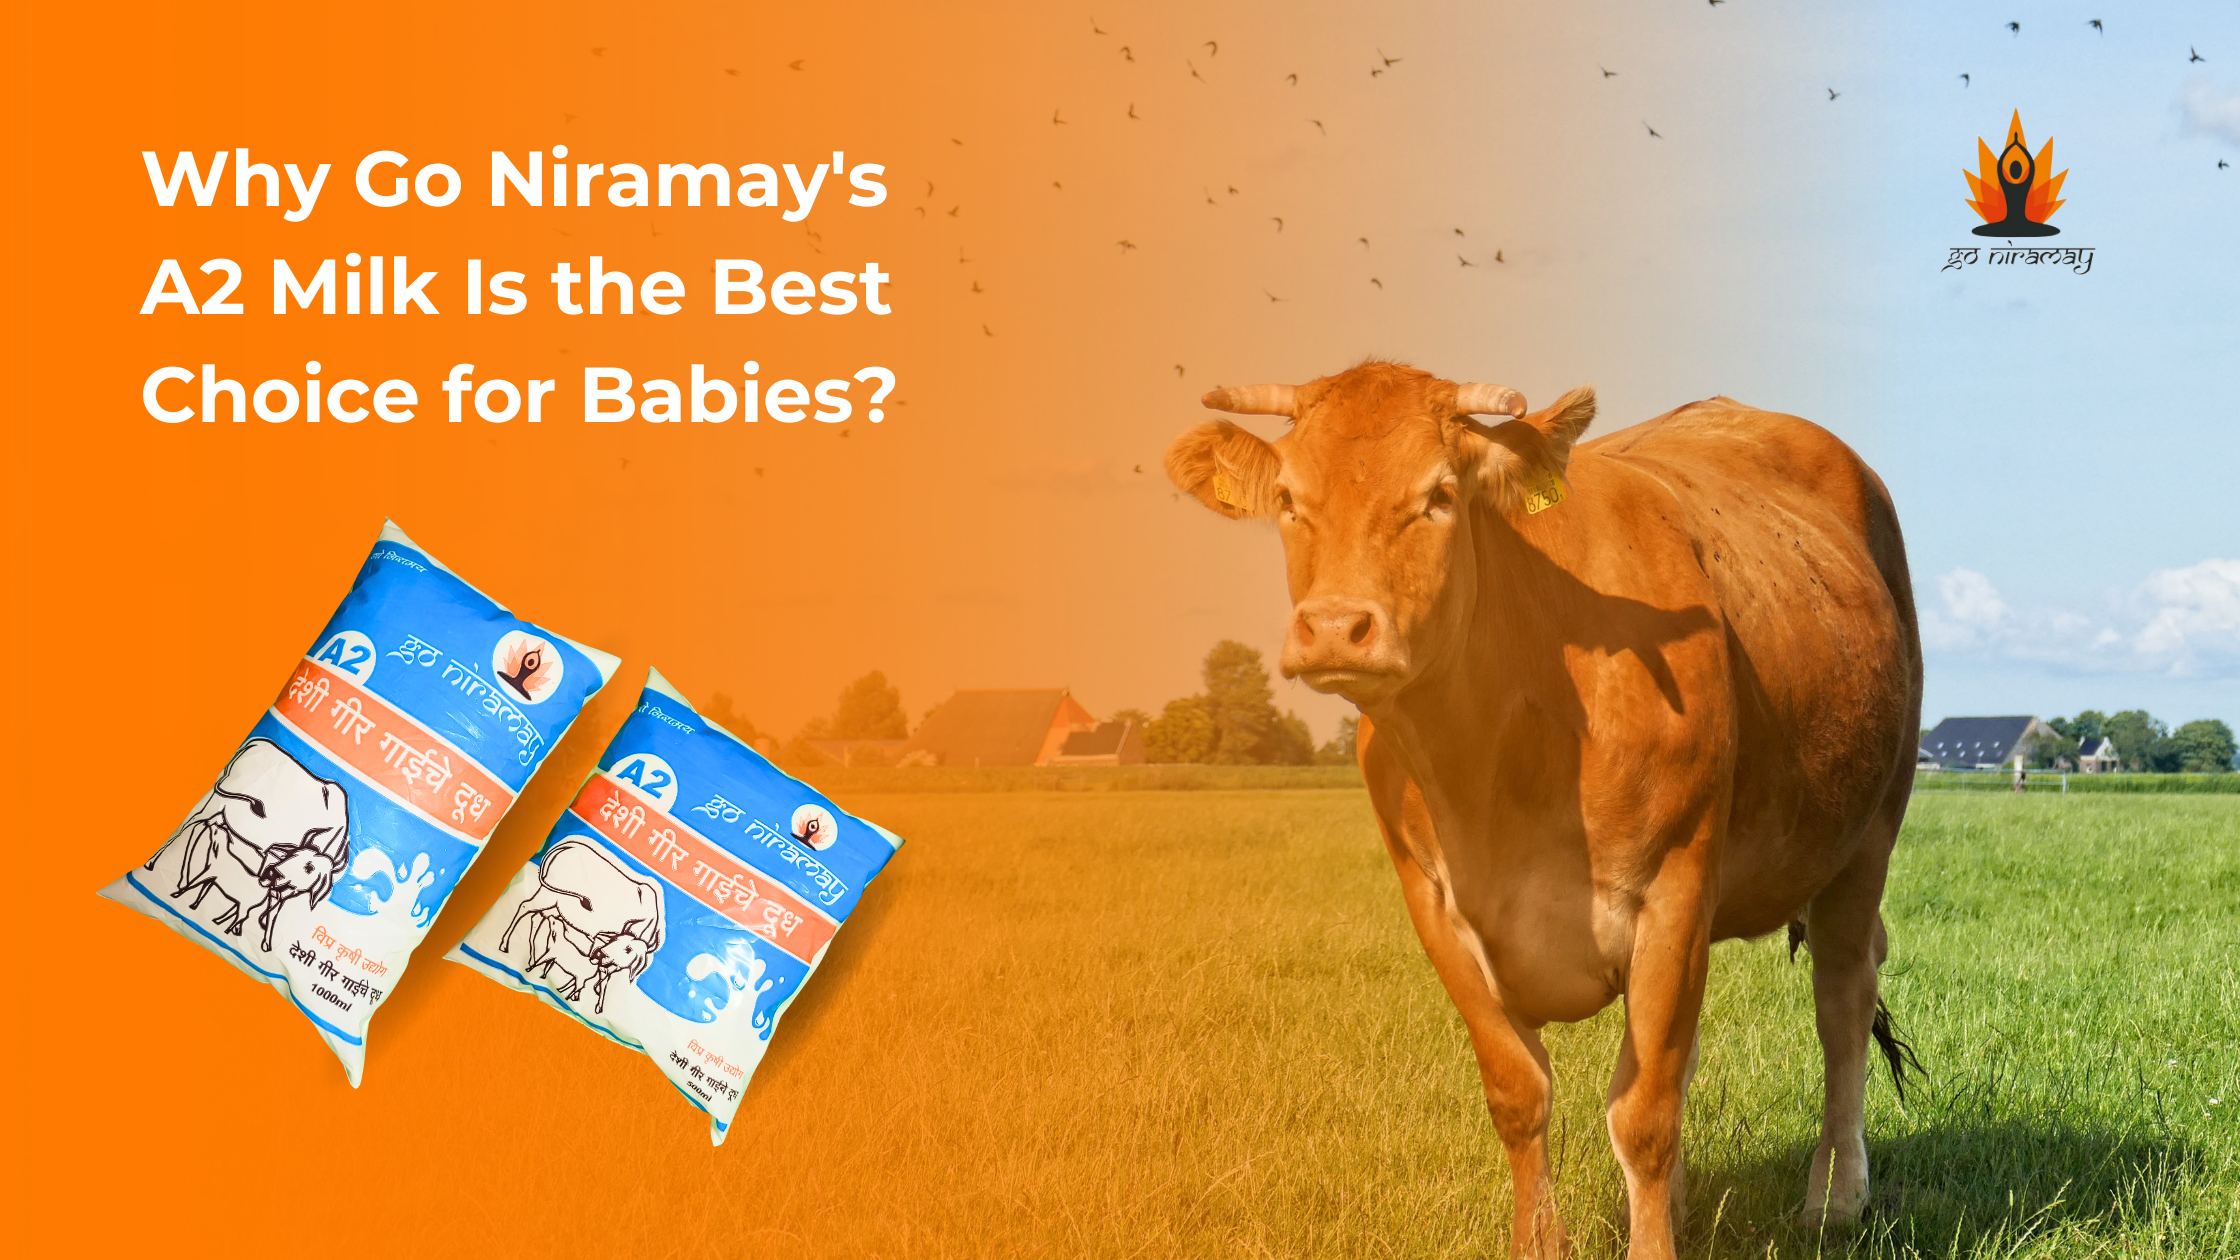 Why Go Niramay's A2 Milk Is the Best Choice for Babies